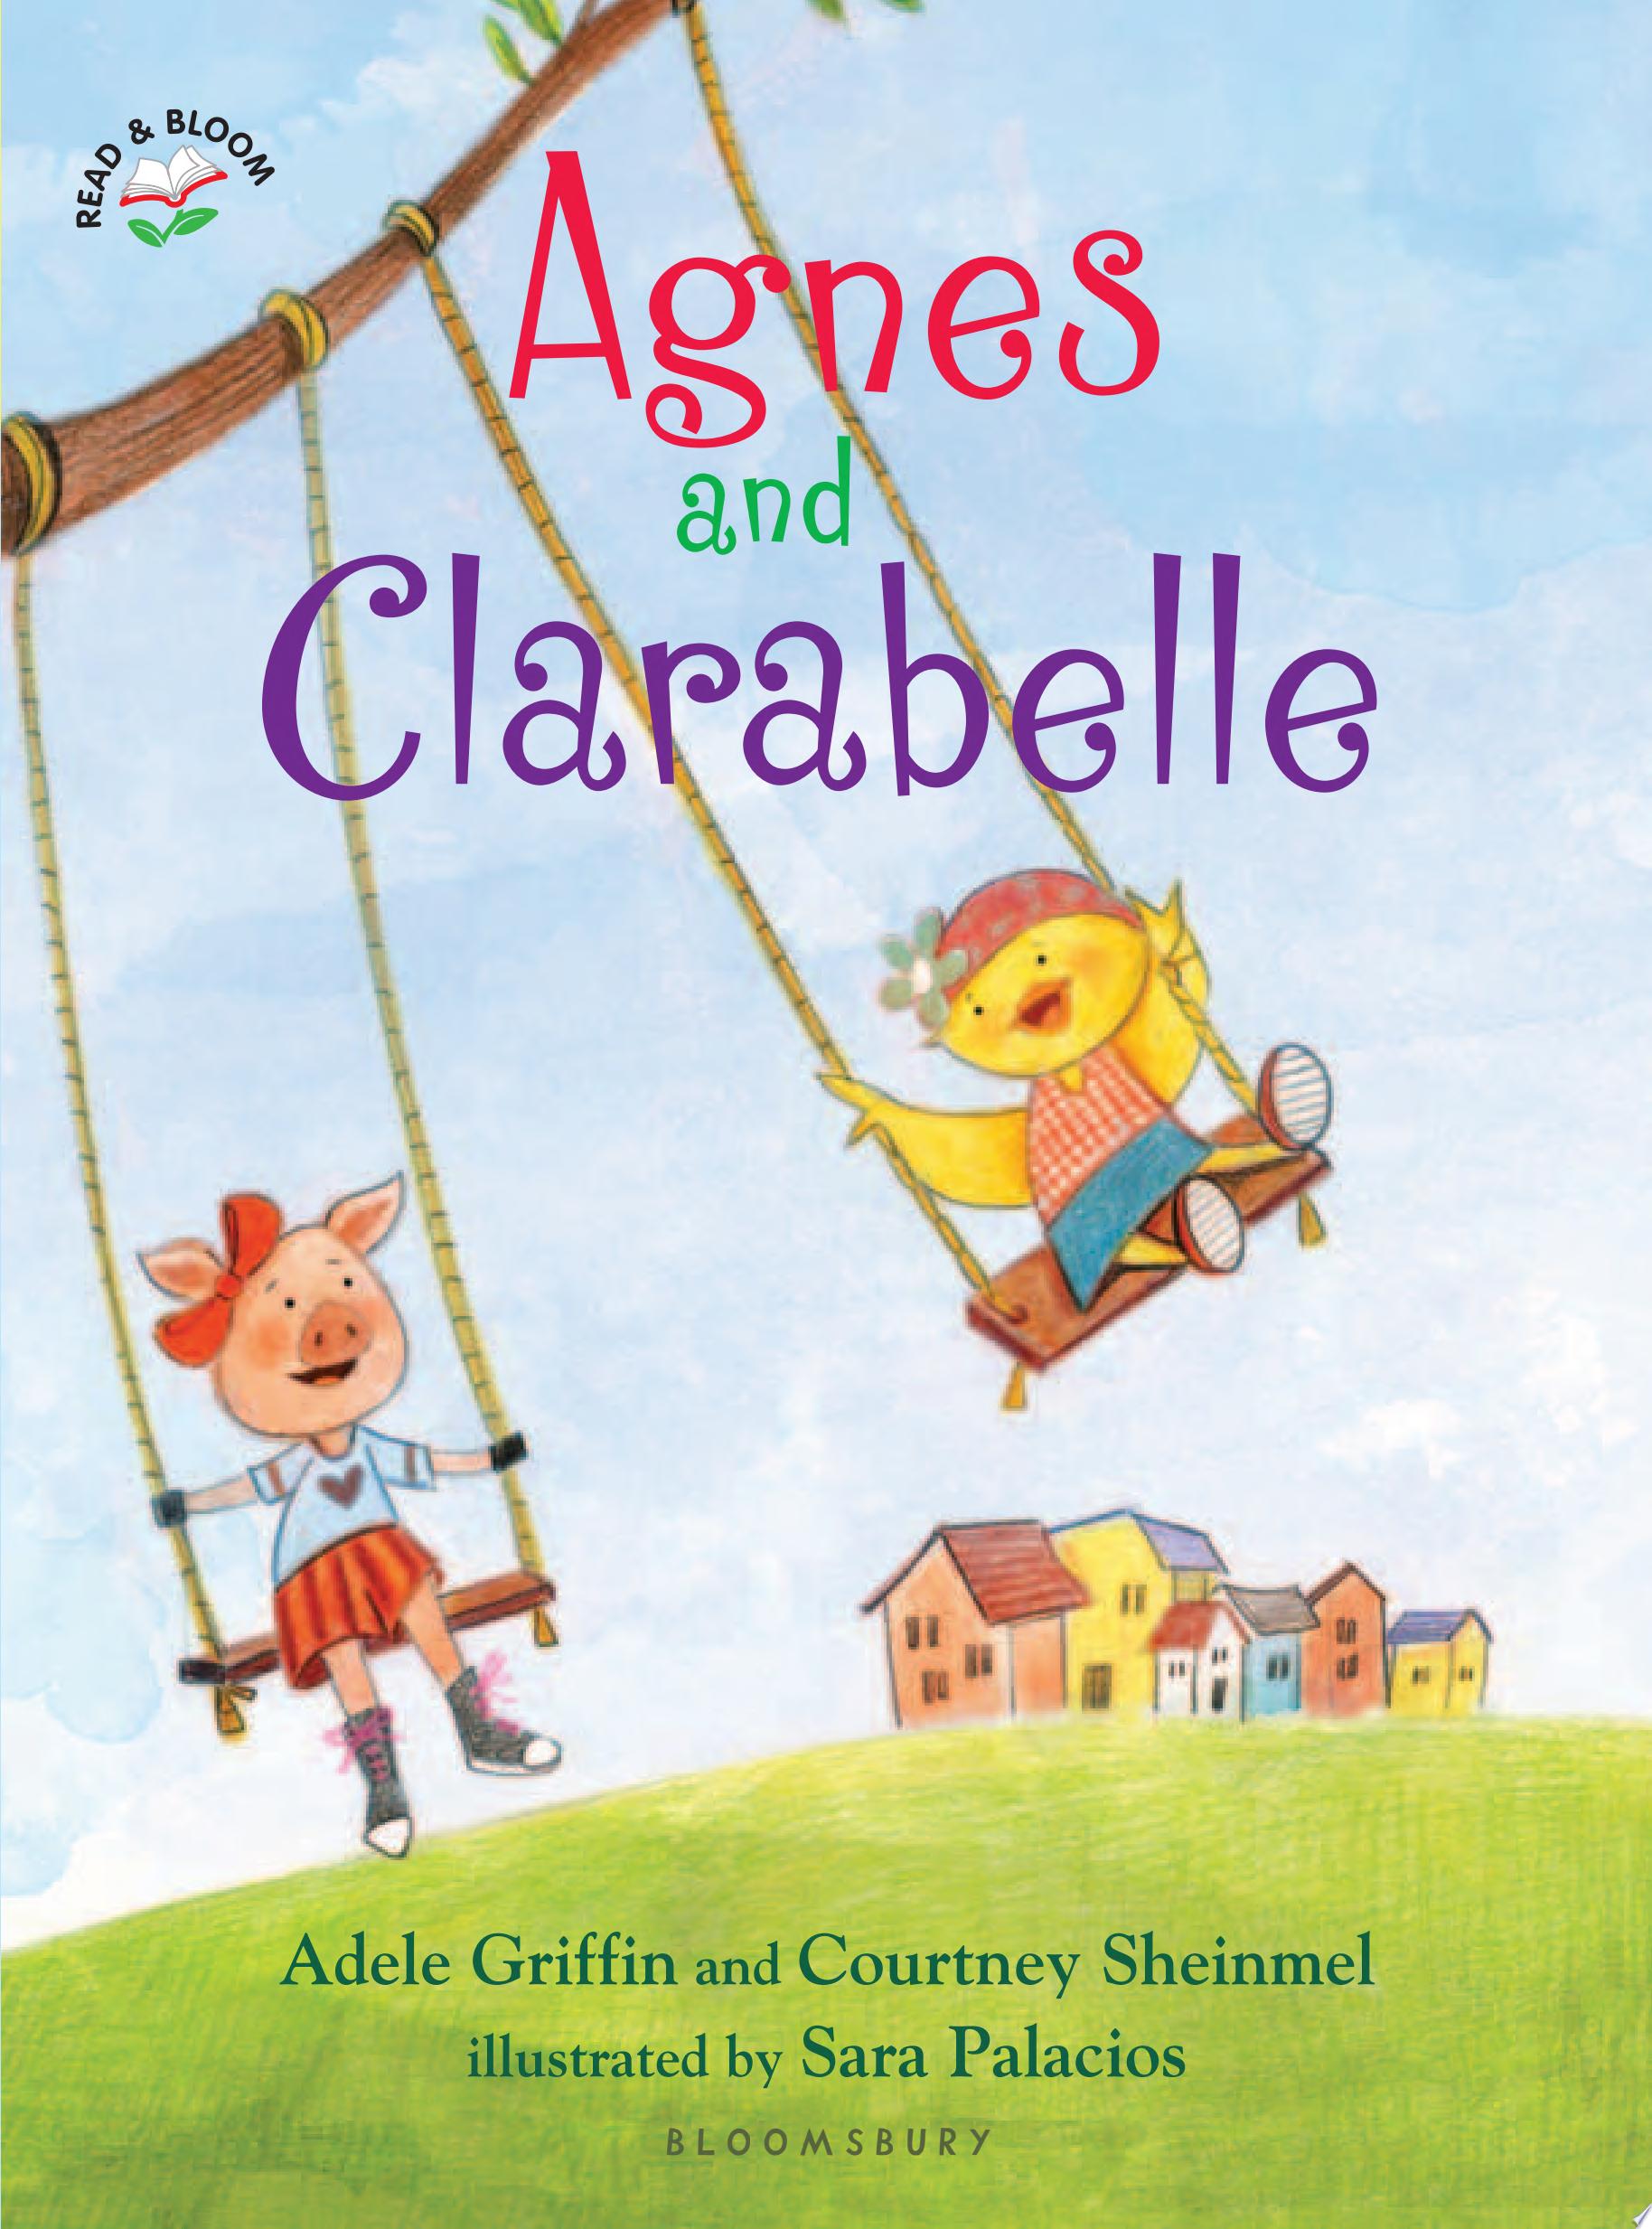 Image for "Agnes and Clarabelle"